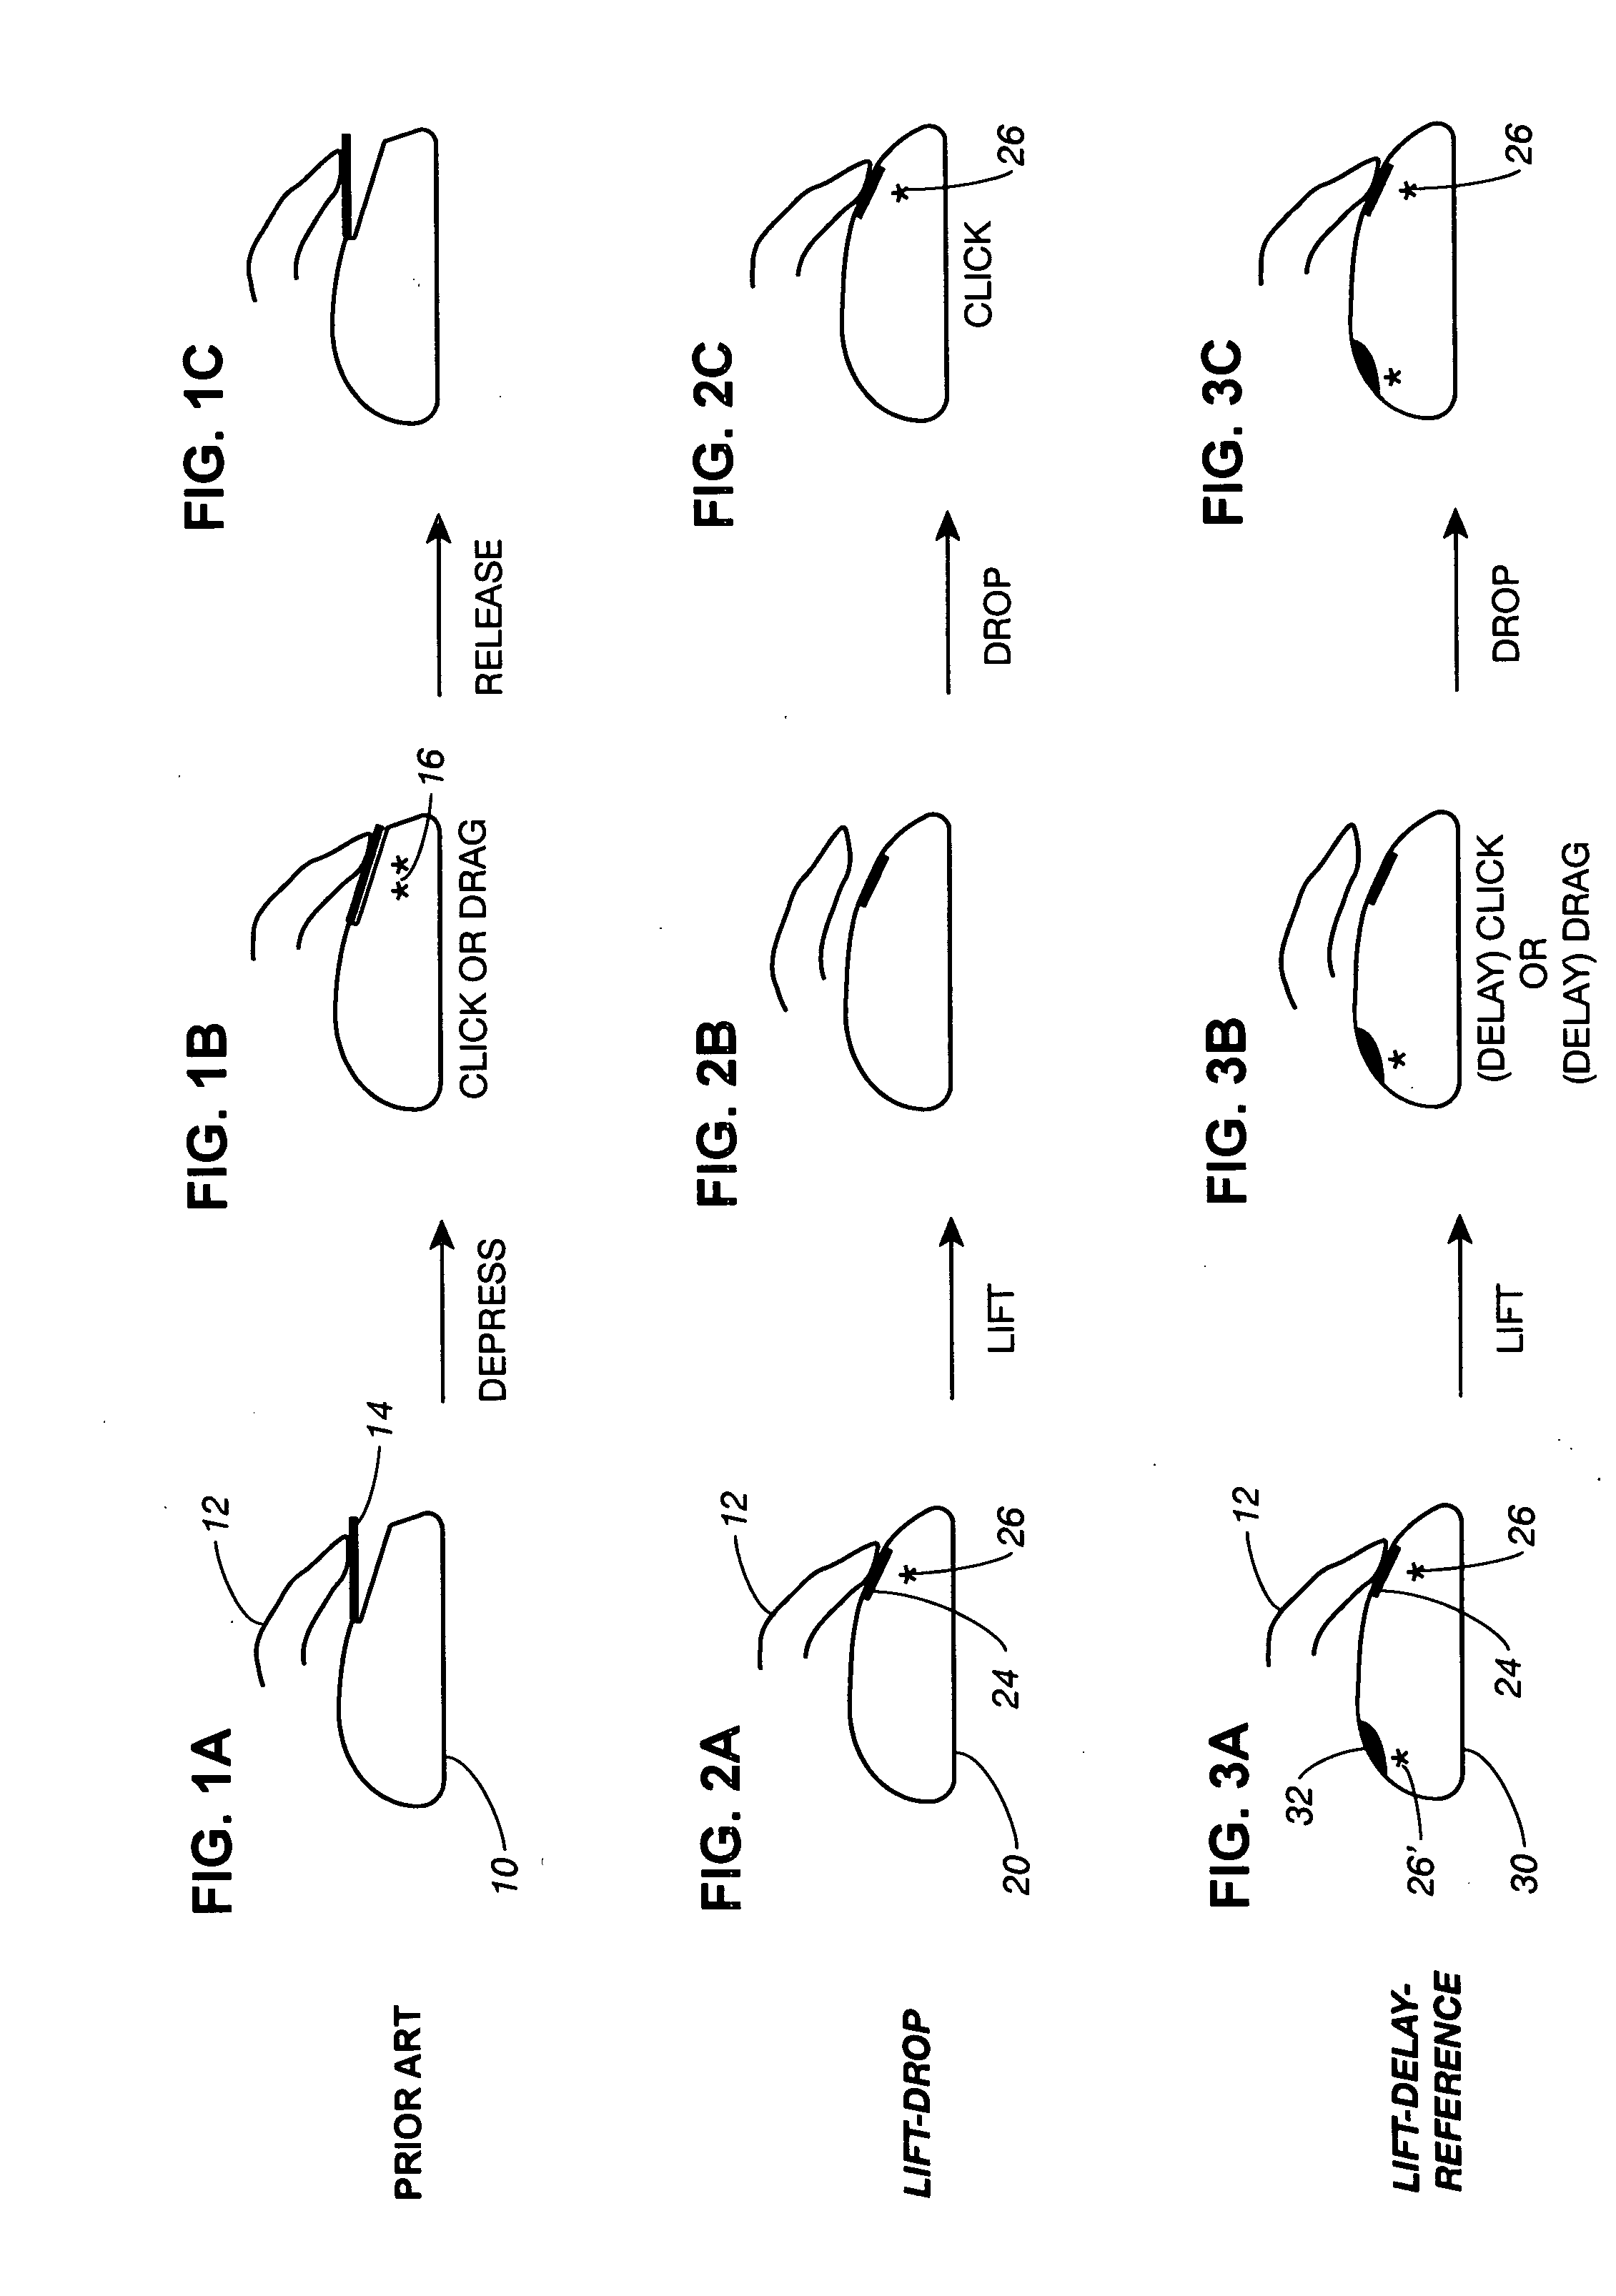 Ergonomic lift-clicking method and apparatus for actuating home switches on computer input devices